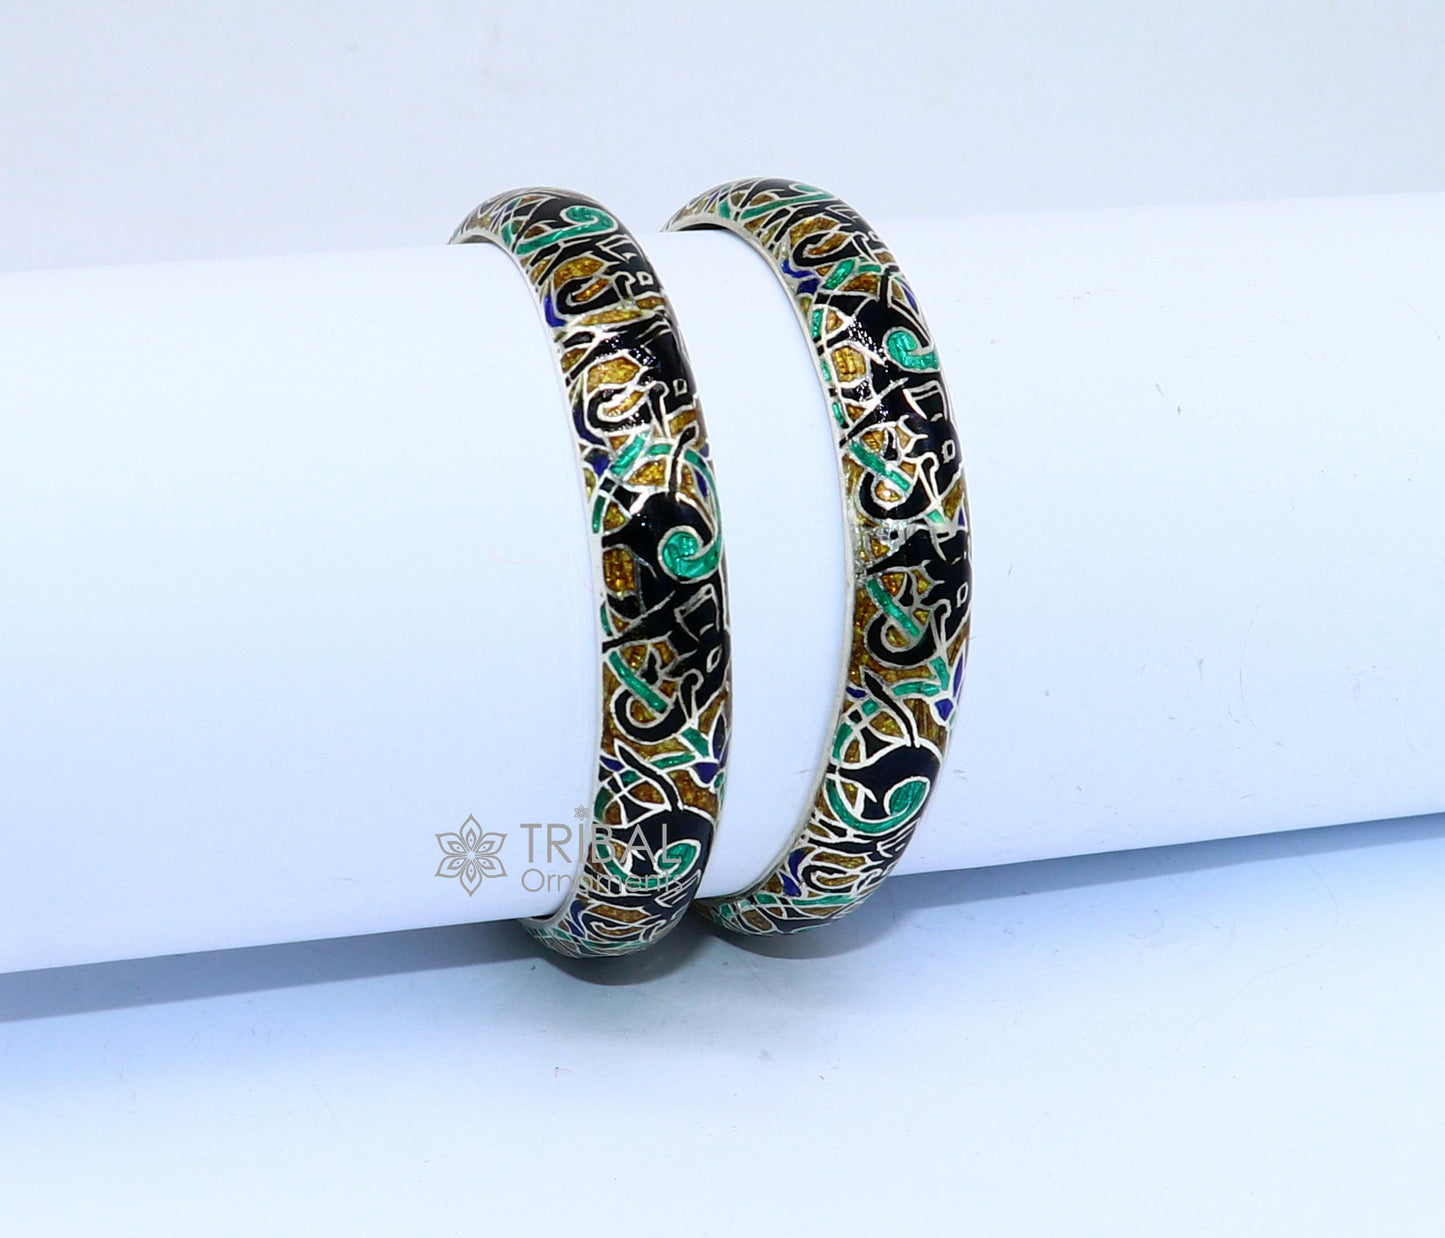 925 Sterling silver handmade amazing meenakari (color enamel )bangle bracelet elephant design Cultral trendy style jewelry from india nba355 - TRIBAL ORNAMENTS